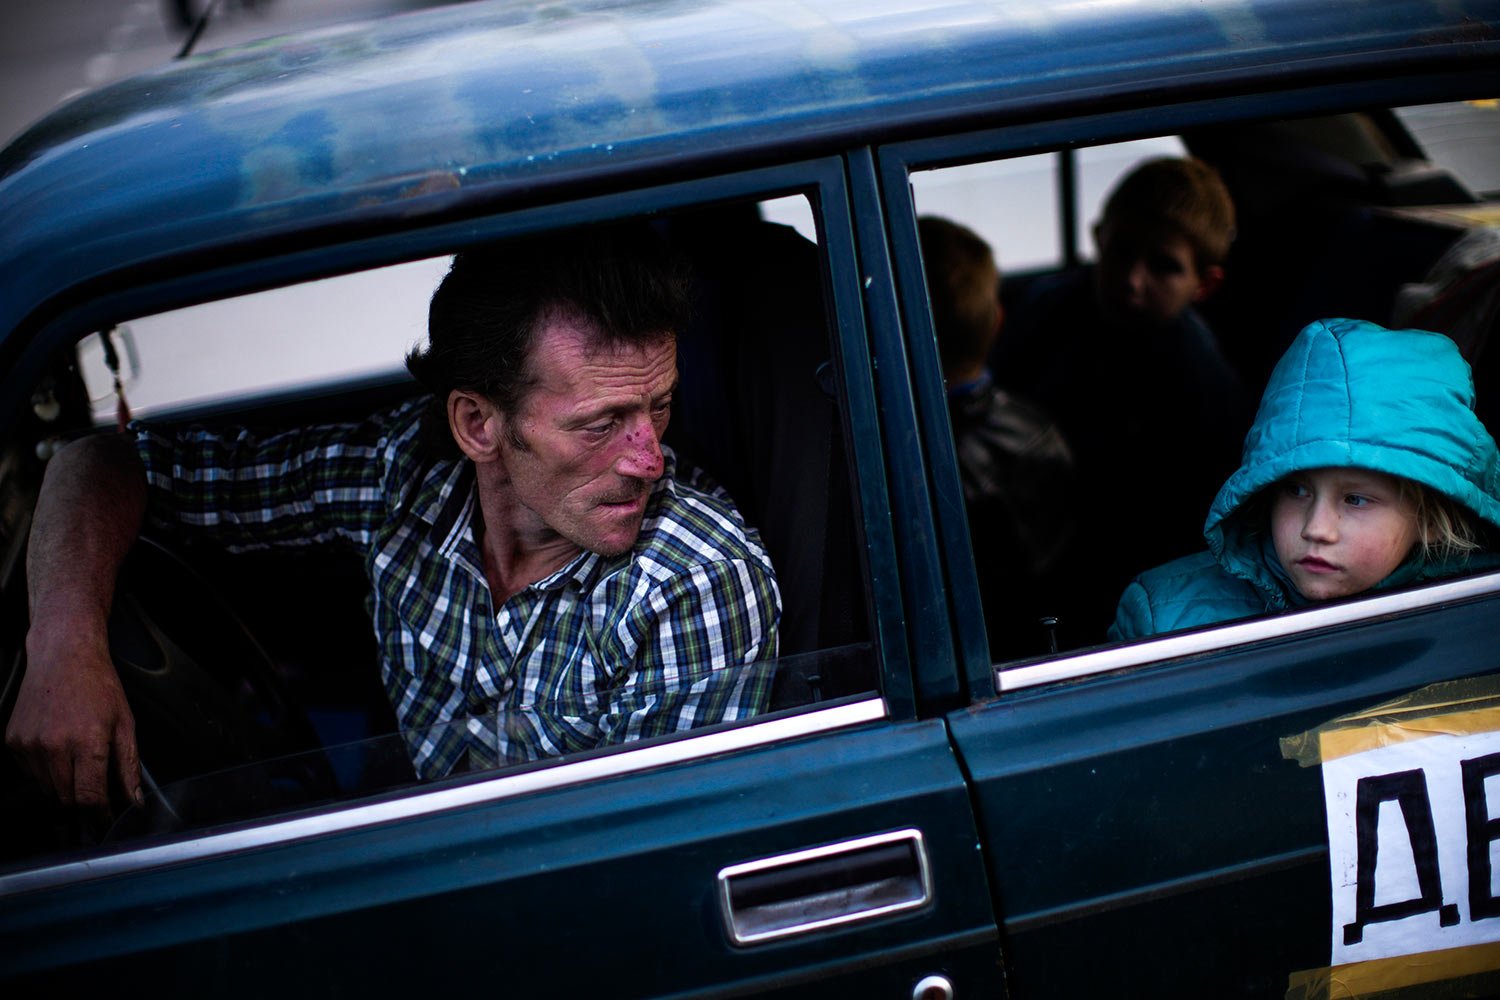  A man looks at his daughter as they arrive to a reception center for displaced people in Zaporizhzhia, Ukraine, Monday, May 2, 2022. Thousands of Ukrainians continue to leave Russian occupied areas. (AP Photo/Francisco Seco) 